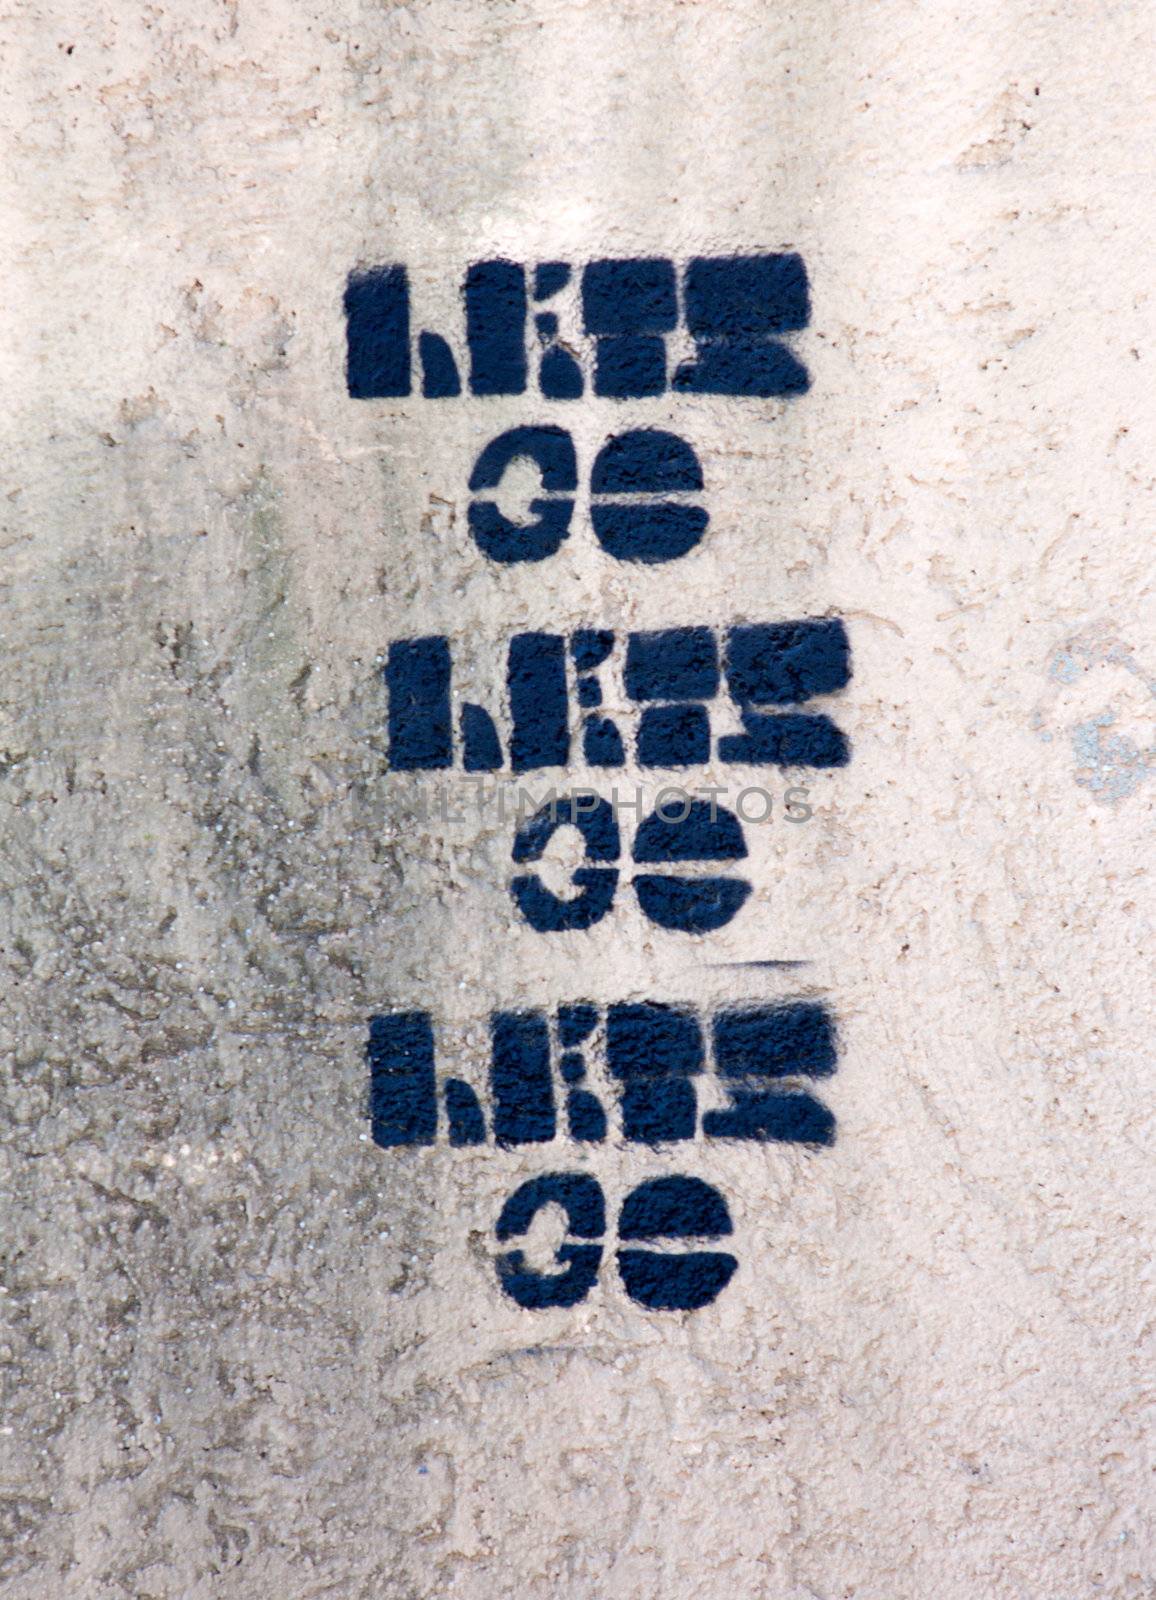 Phrase "lets go" painted on the street wall